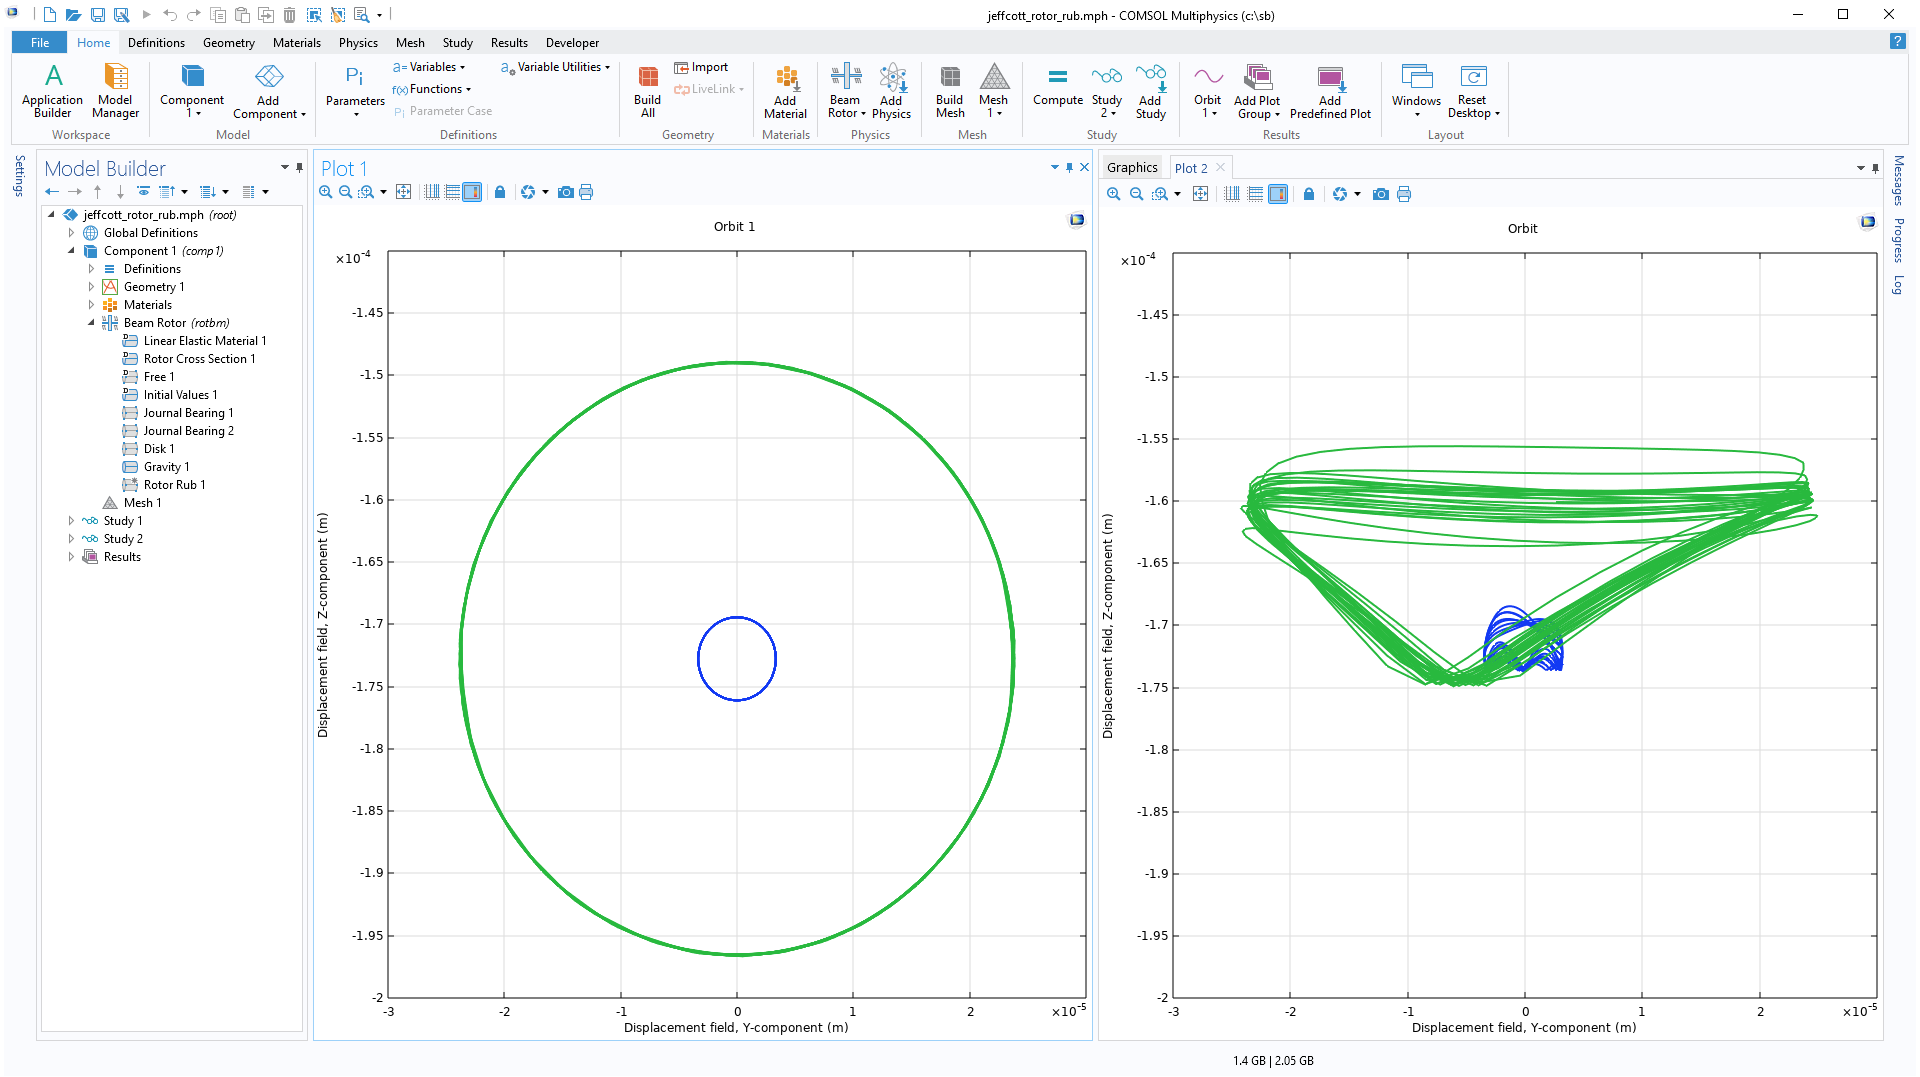 The COMSOL Multiphysics UI showing the Model Builder and two Graphics windows.